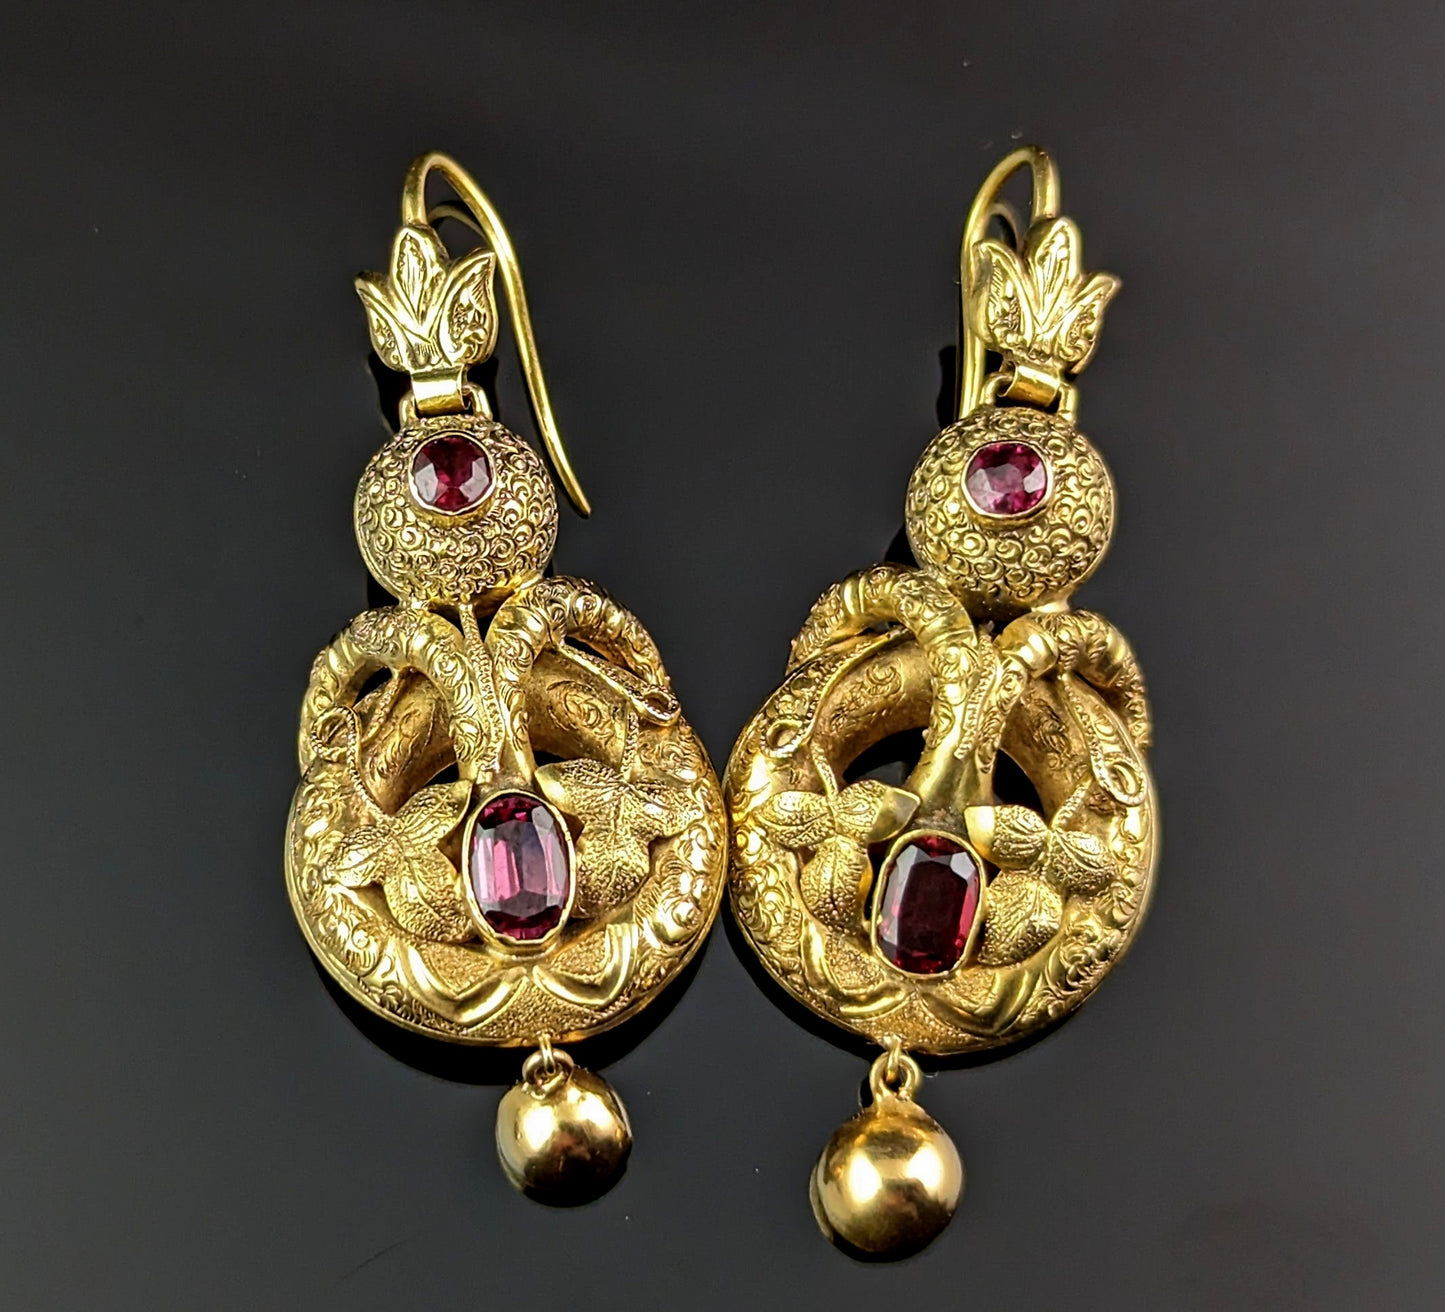 Antique Victorian garnet drop earrings, 18ct gold, Leaves and Vine